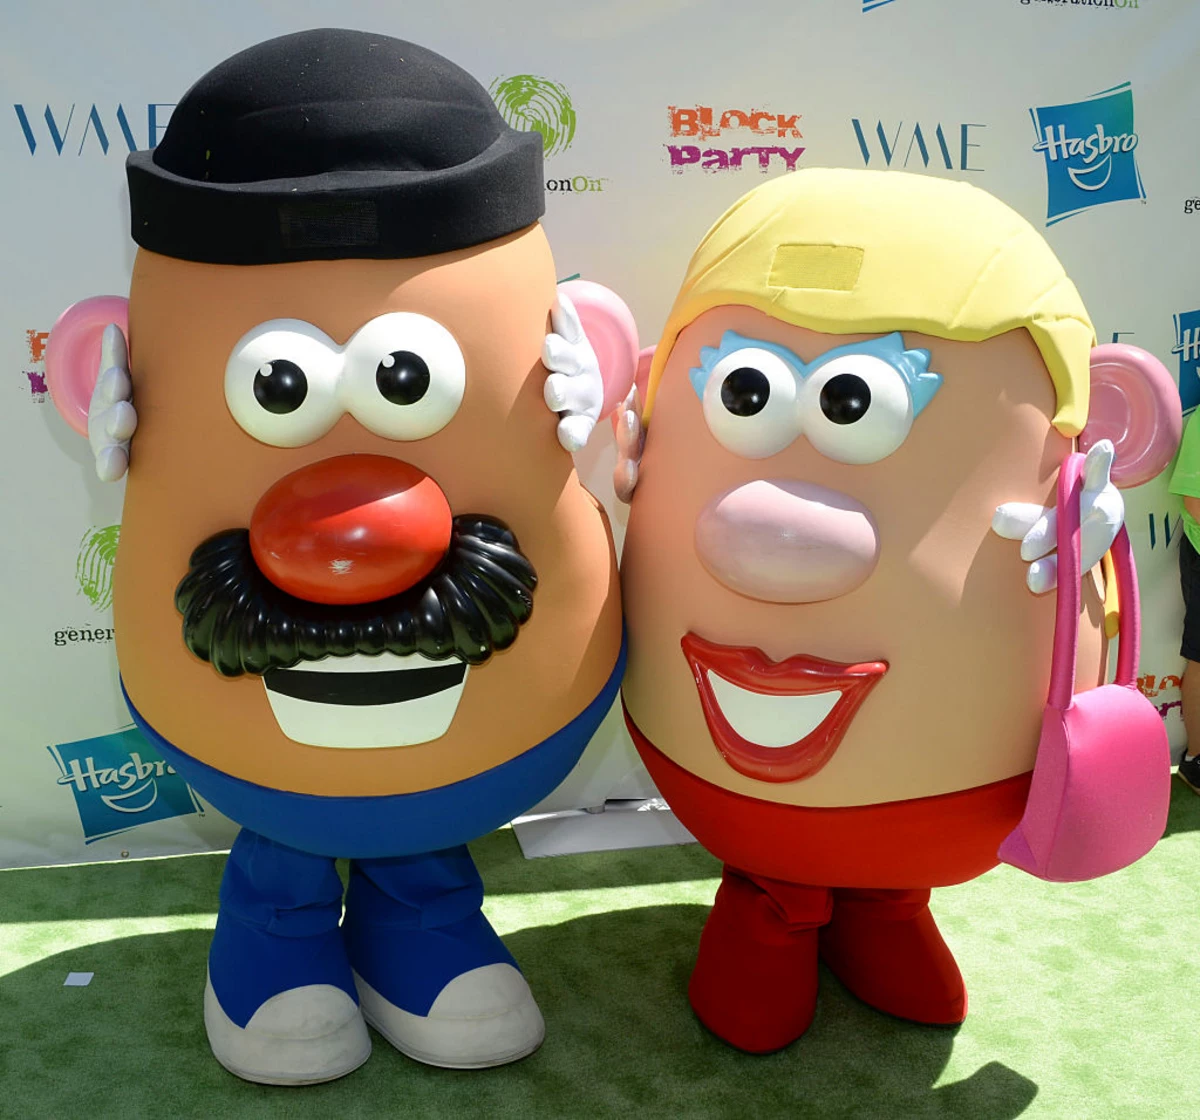 Say Good-Bye To Mr. Potato Head And Hello To...